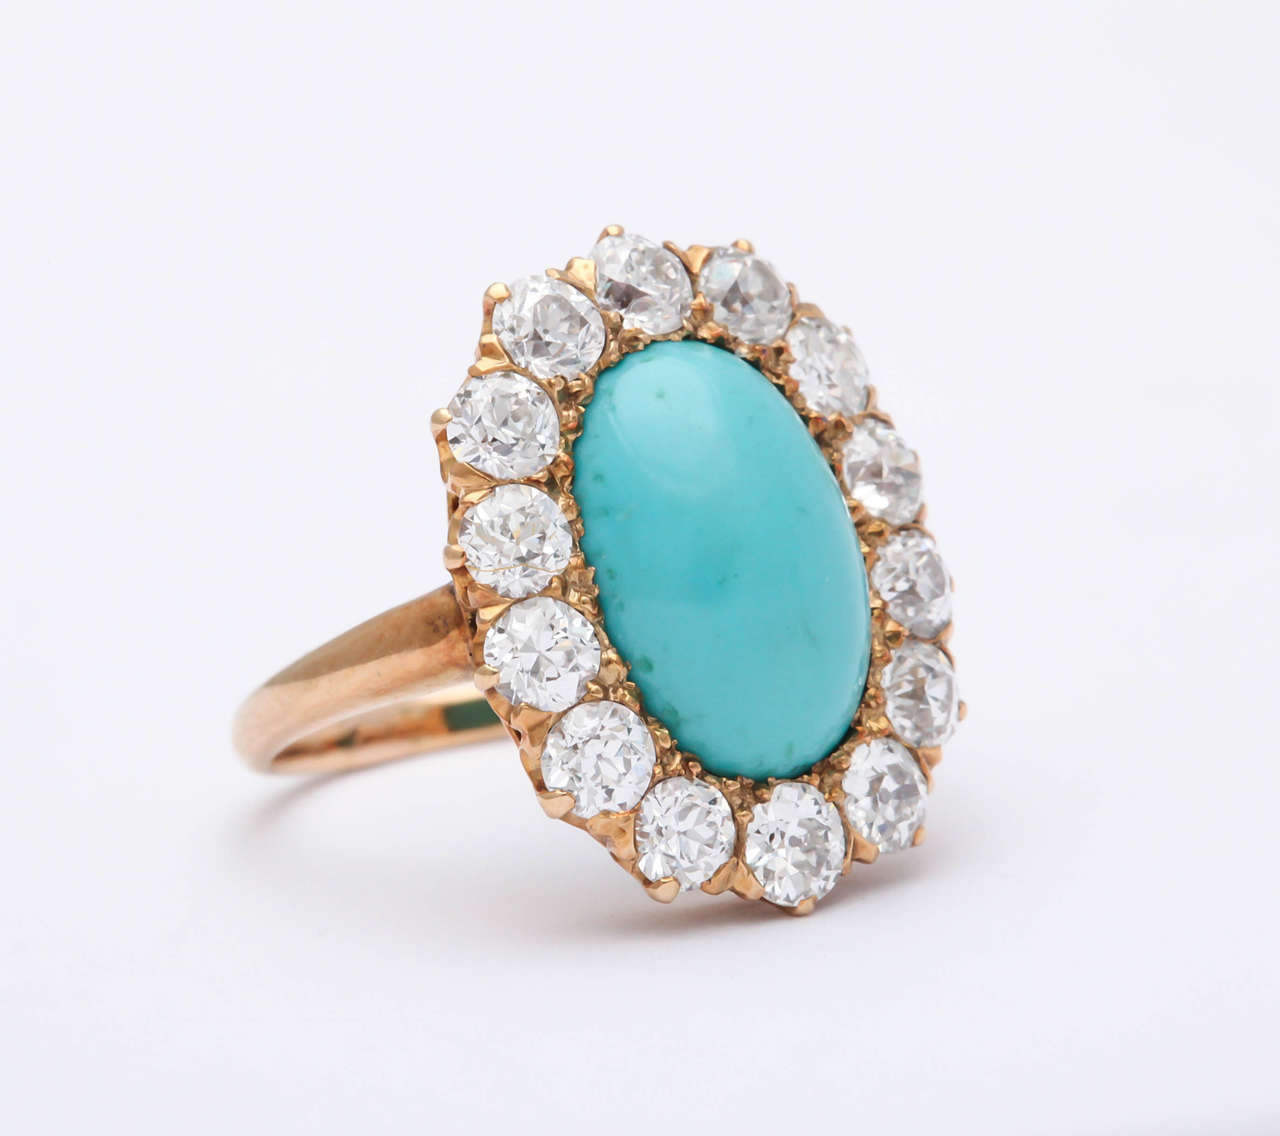 Beautiful Edwardian Persian Turquoise Oval surrounded by 14 very clean & very white old mine Diamonds.  Set in 18kt Yellow Gold.  A true Family Heirloom